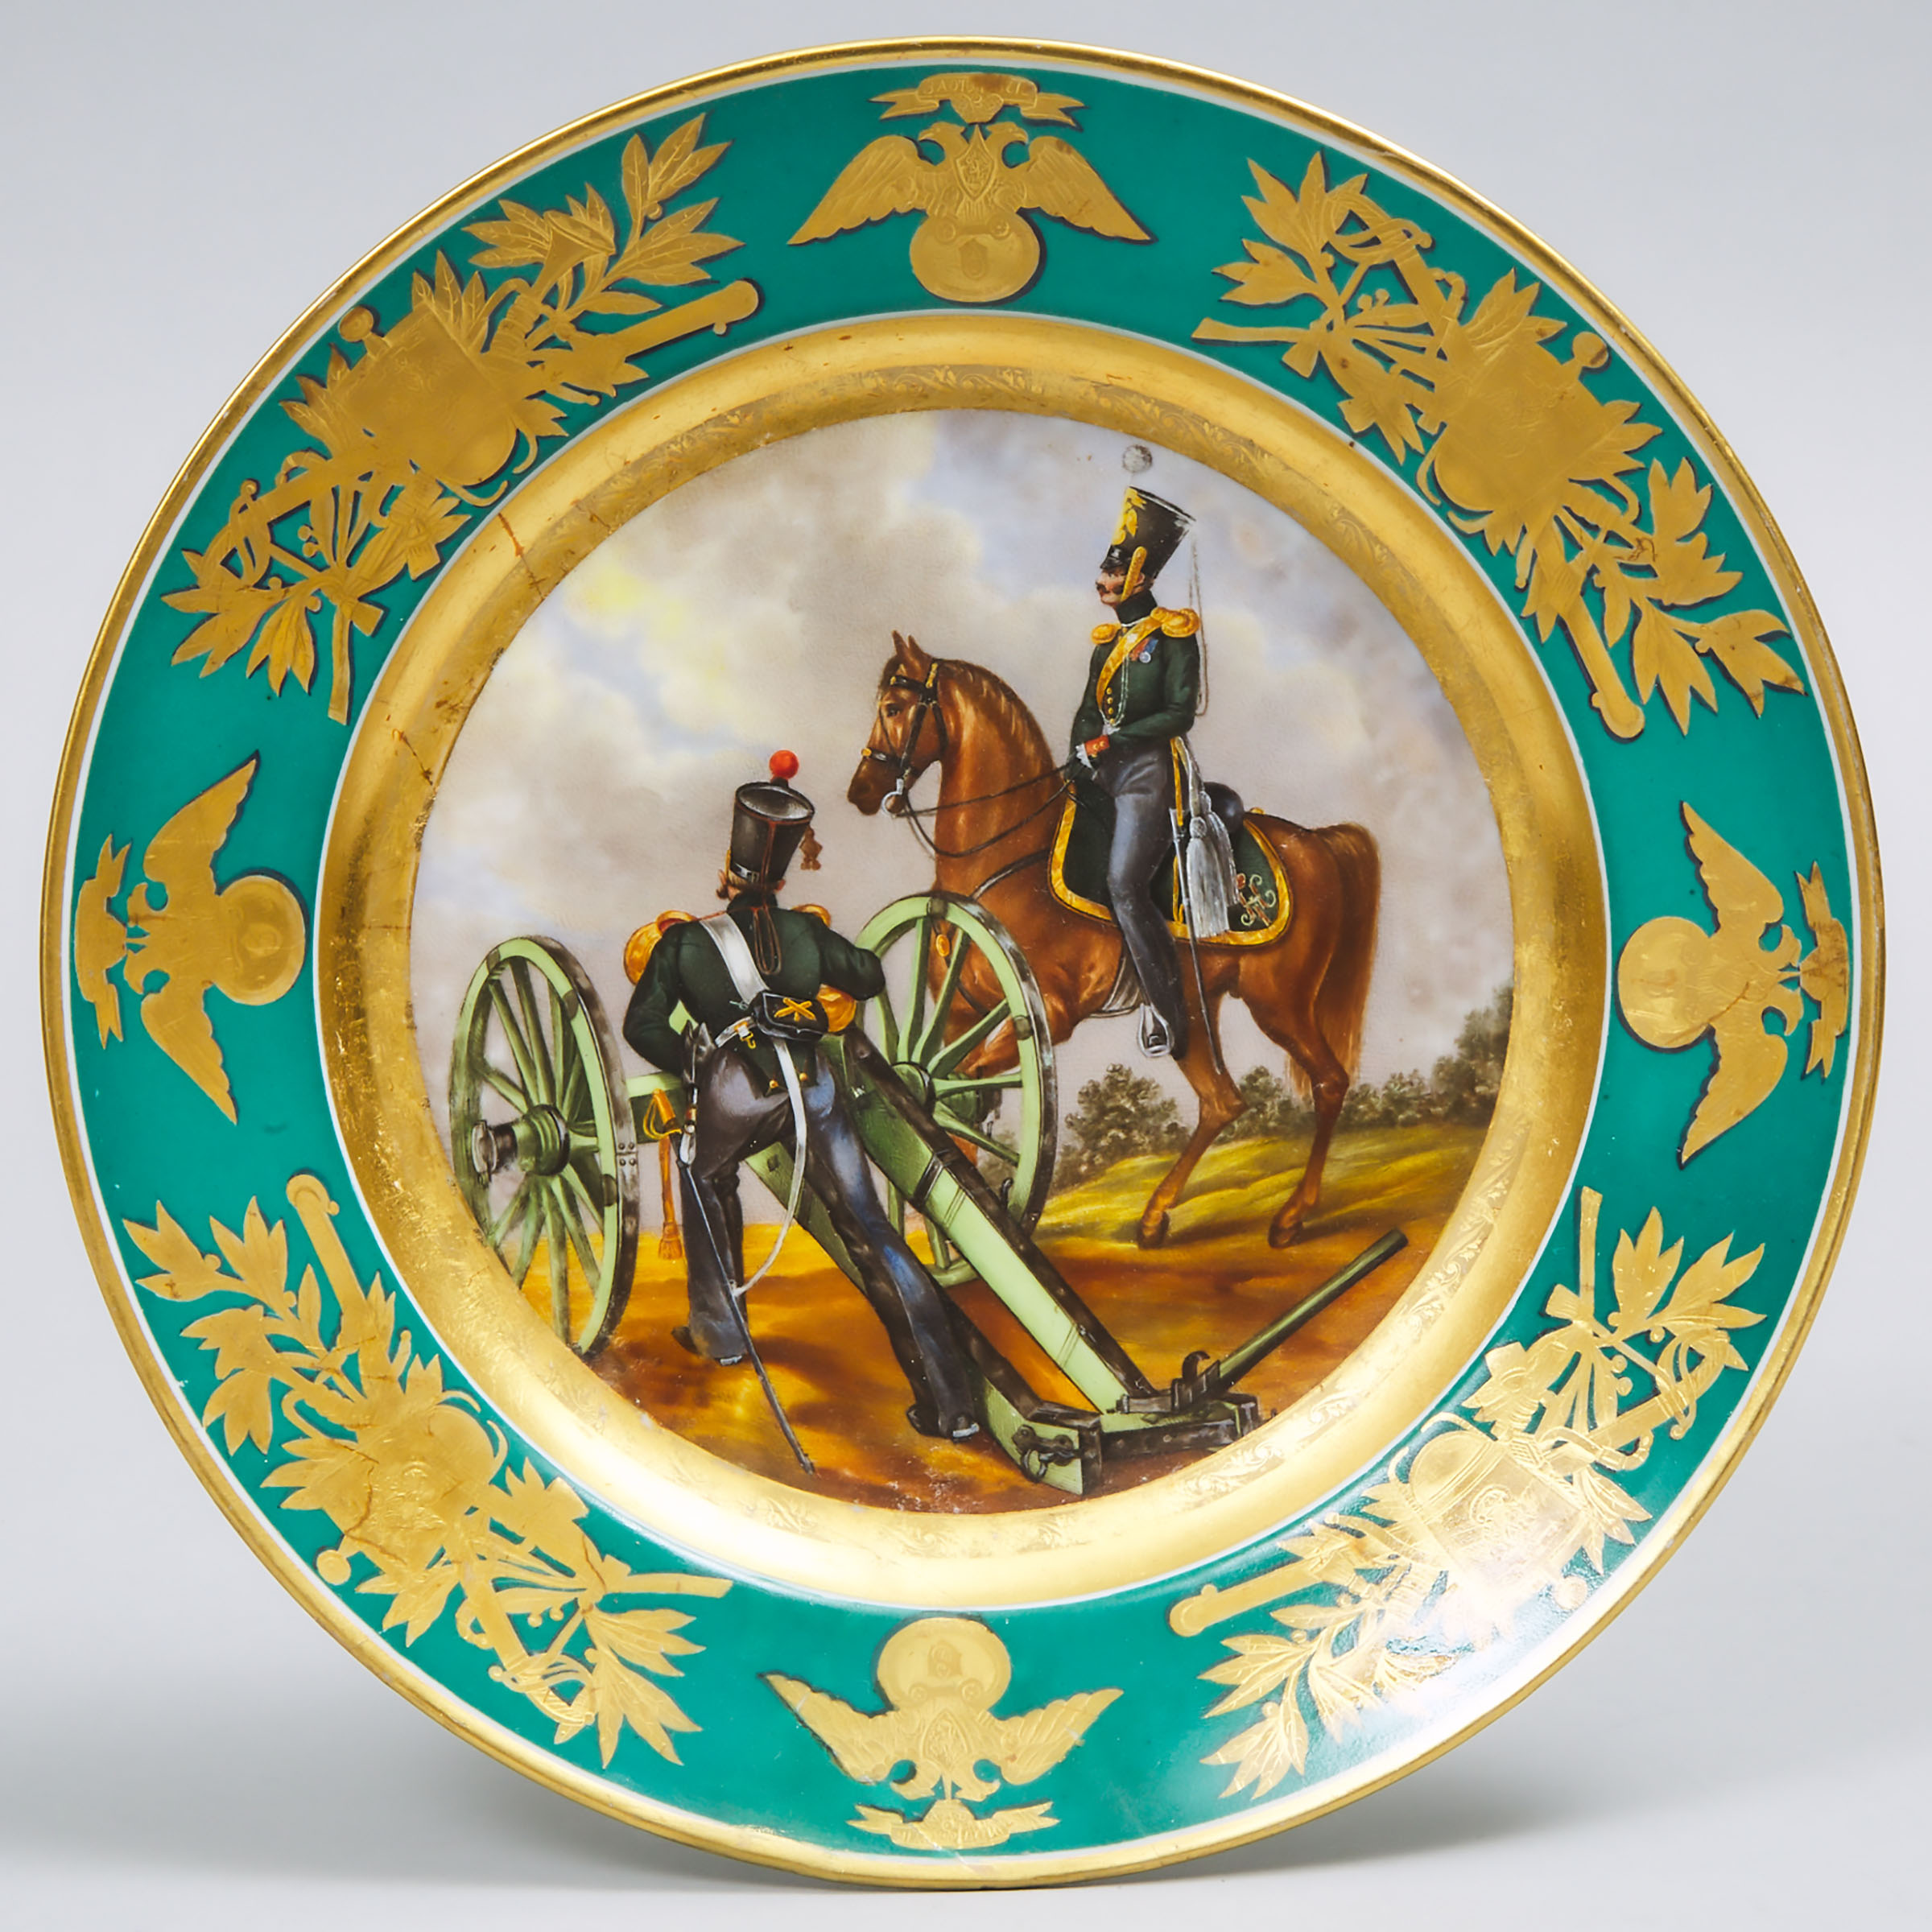 Russian Imperial Porcelain Factory Military Plate, dated 1838